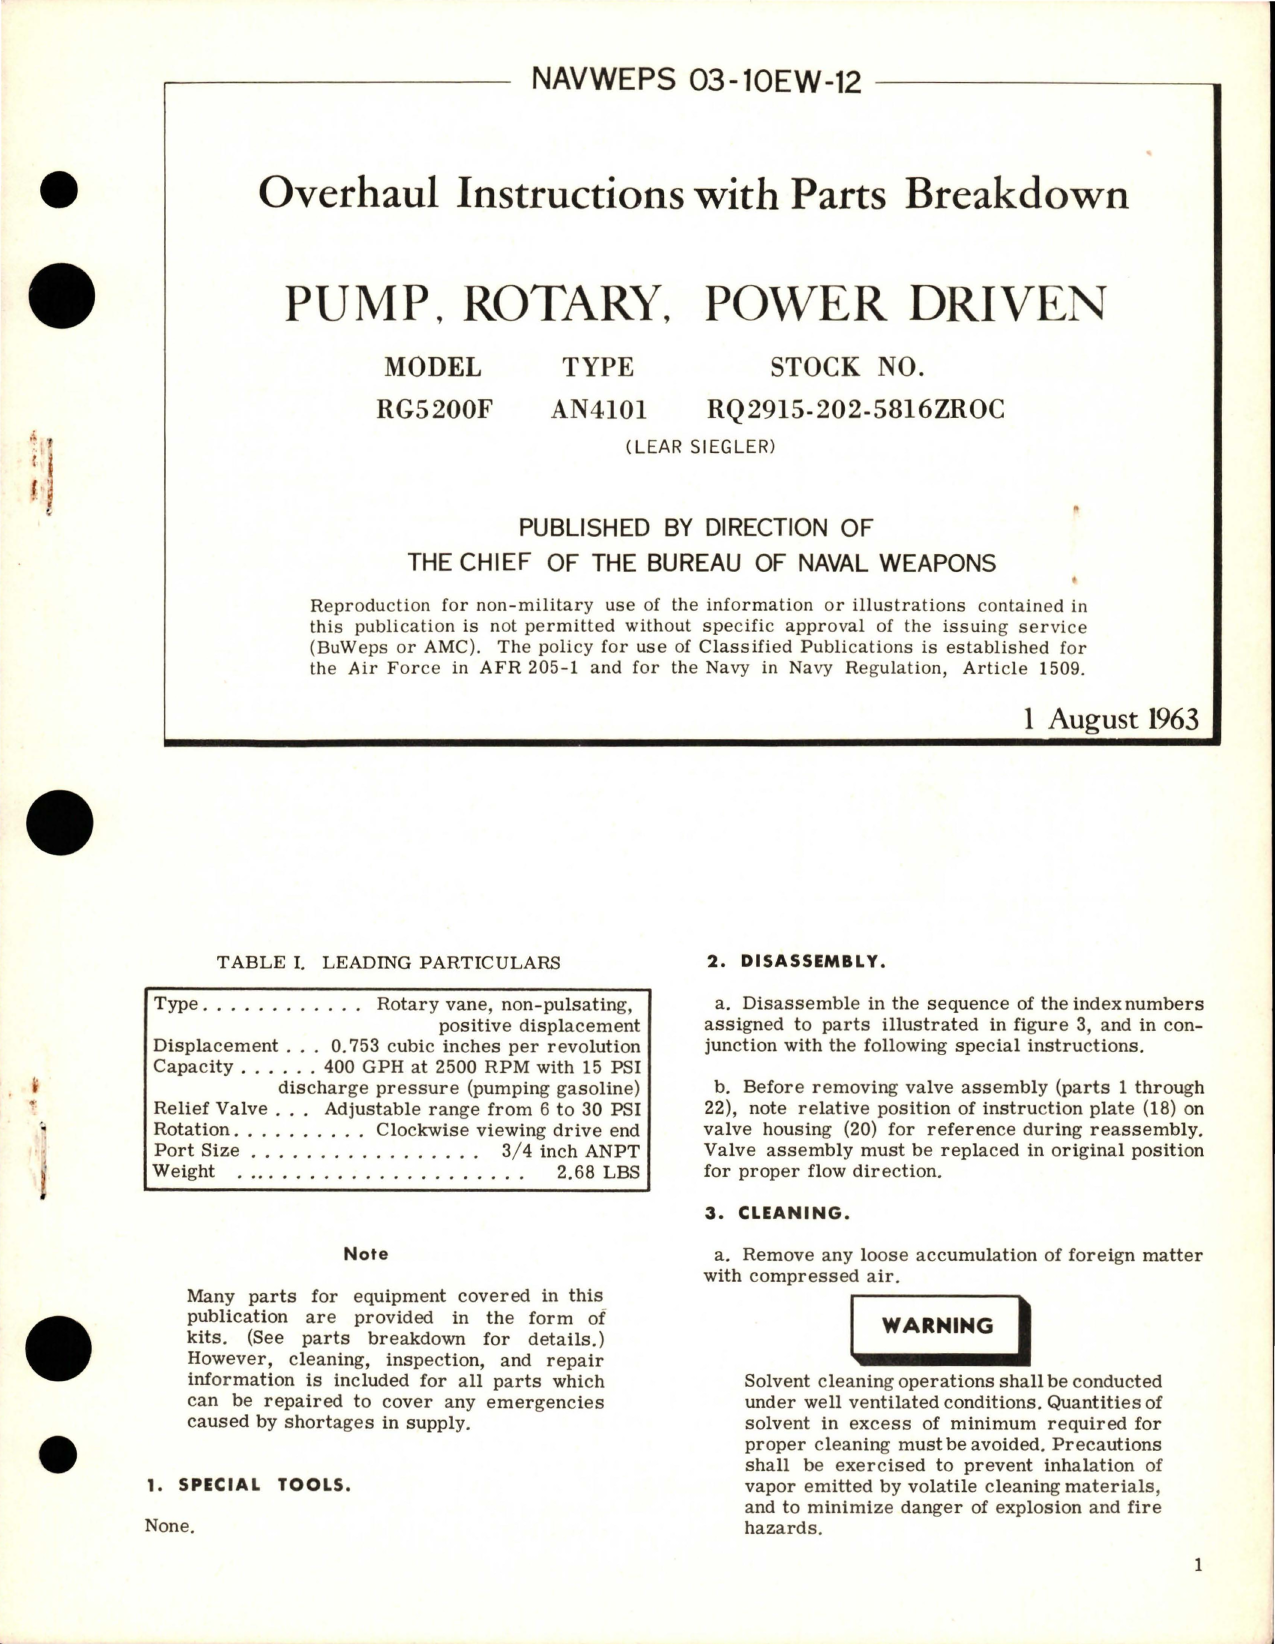 Sample page 1 from AirCorps Library document: Overhaul Instructions with Parts Breakdown for Power Driven Rotary Pump - Model RG5200F - Type AN4101 